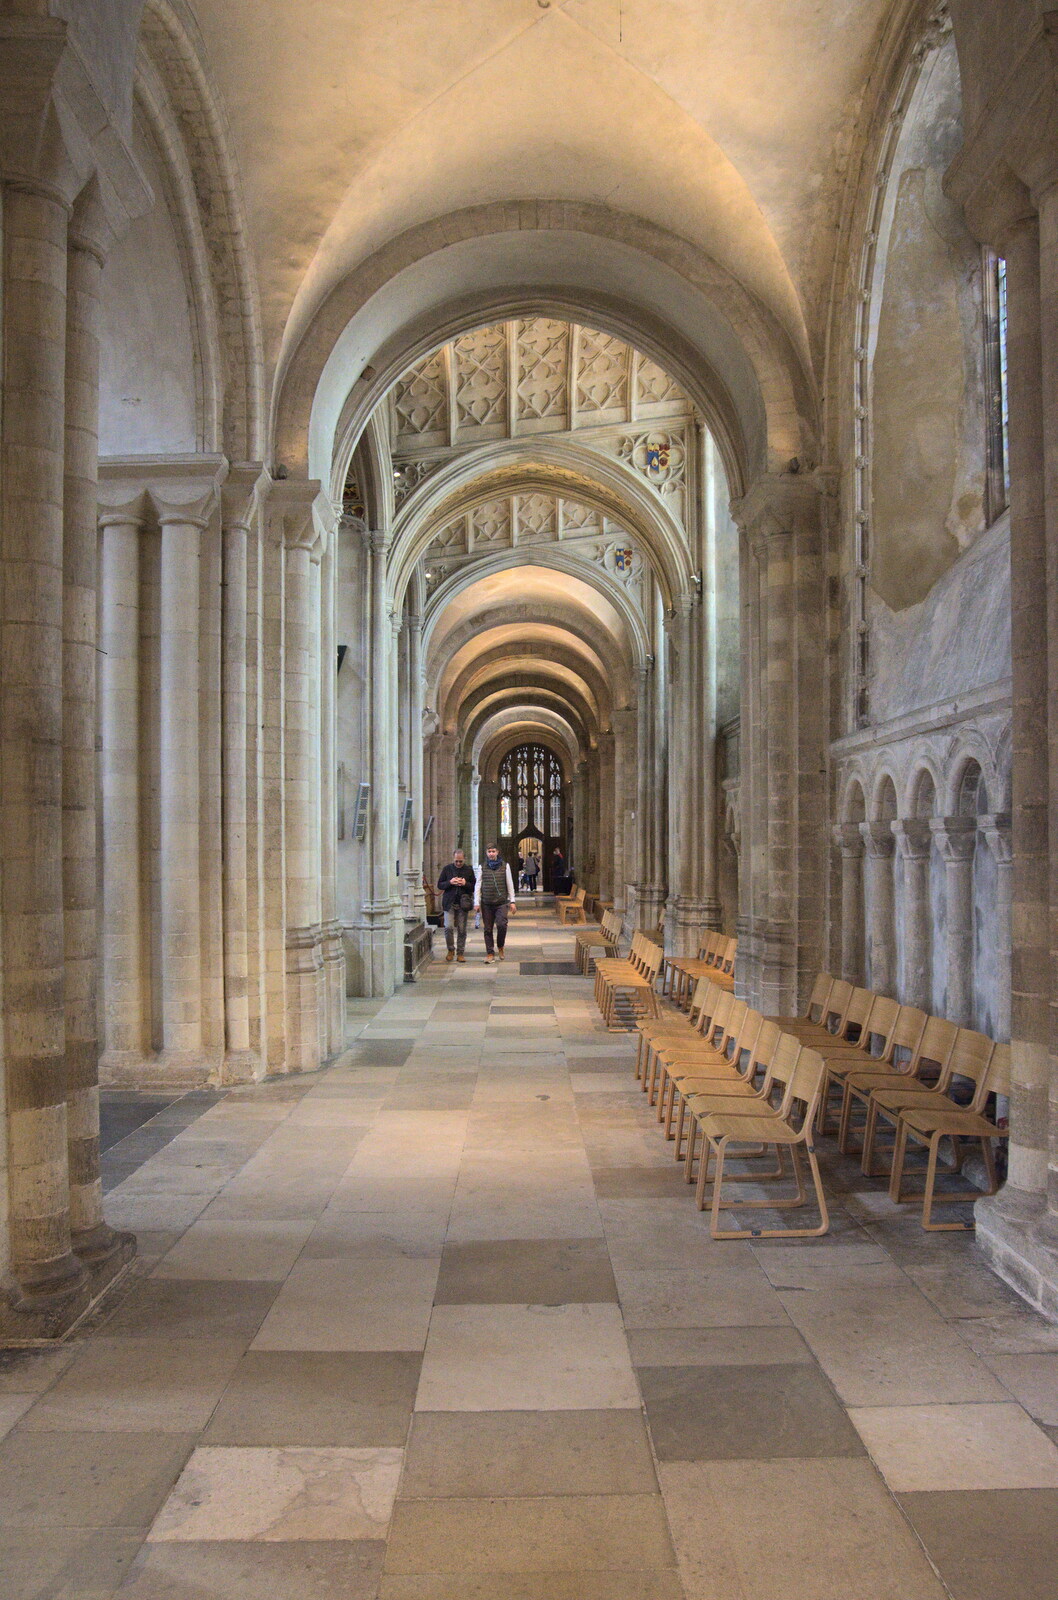 Alongside the nave in Norwich Cathedral from Discovering the Hidden City: Norwich, Norfolk - 23rd May 2022